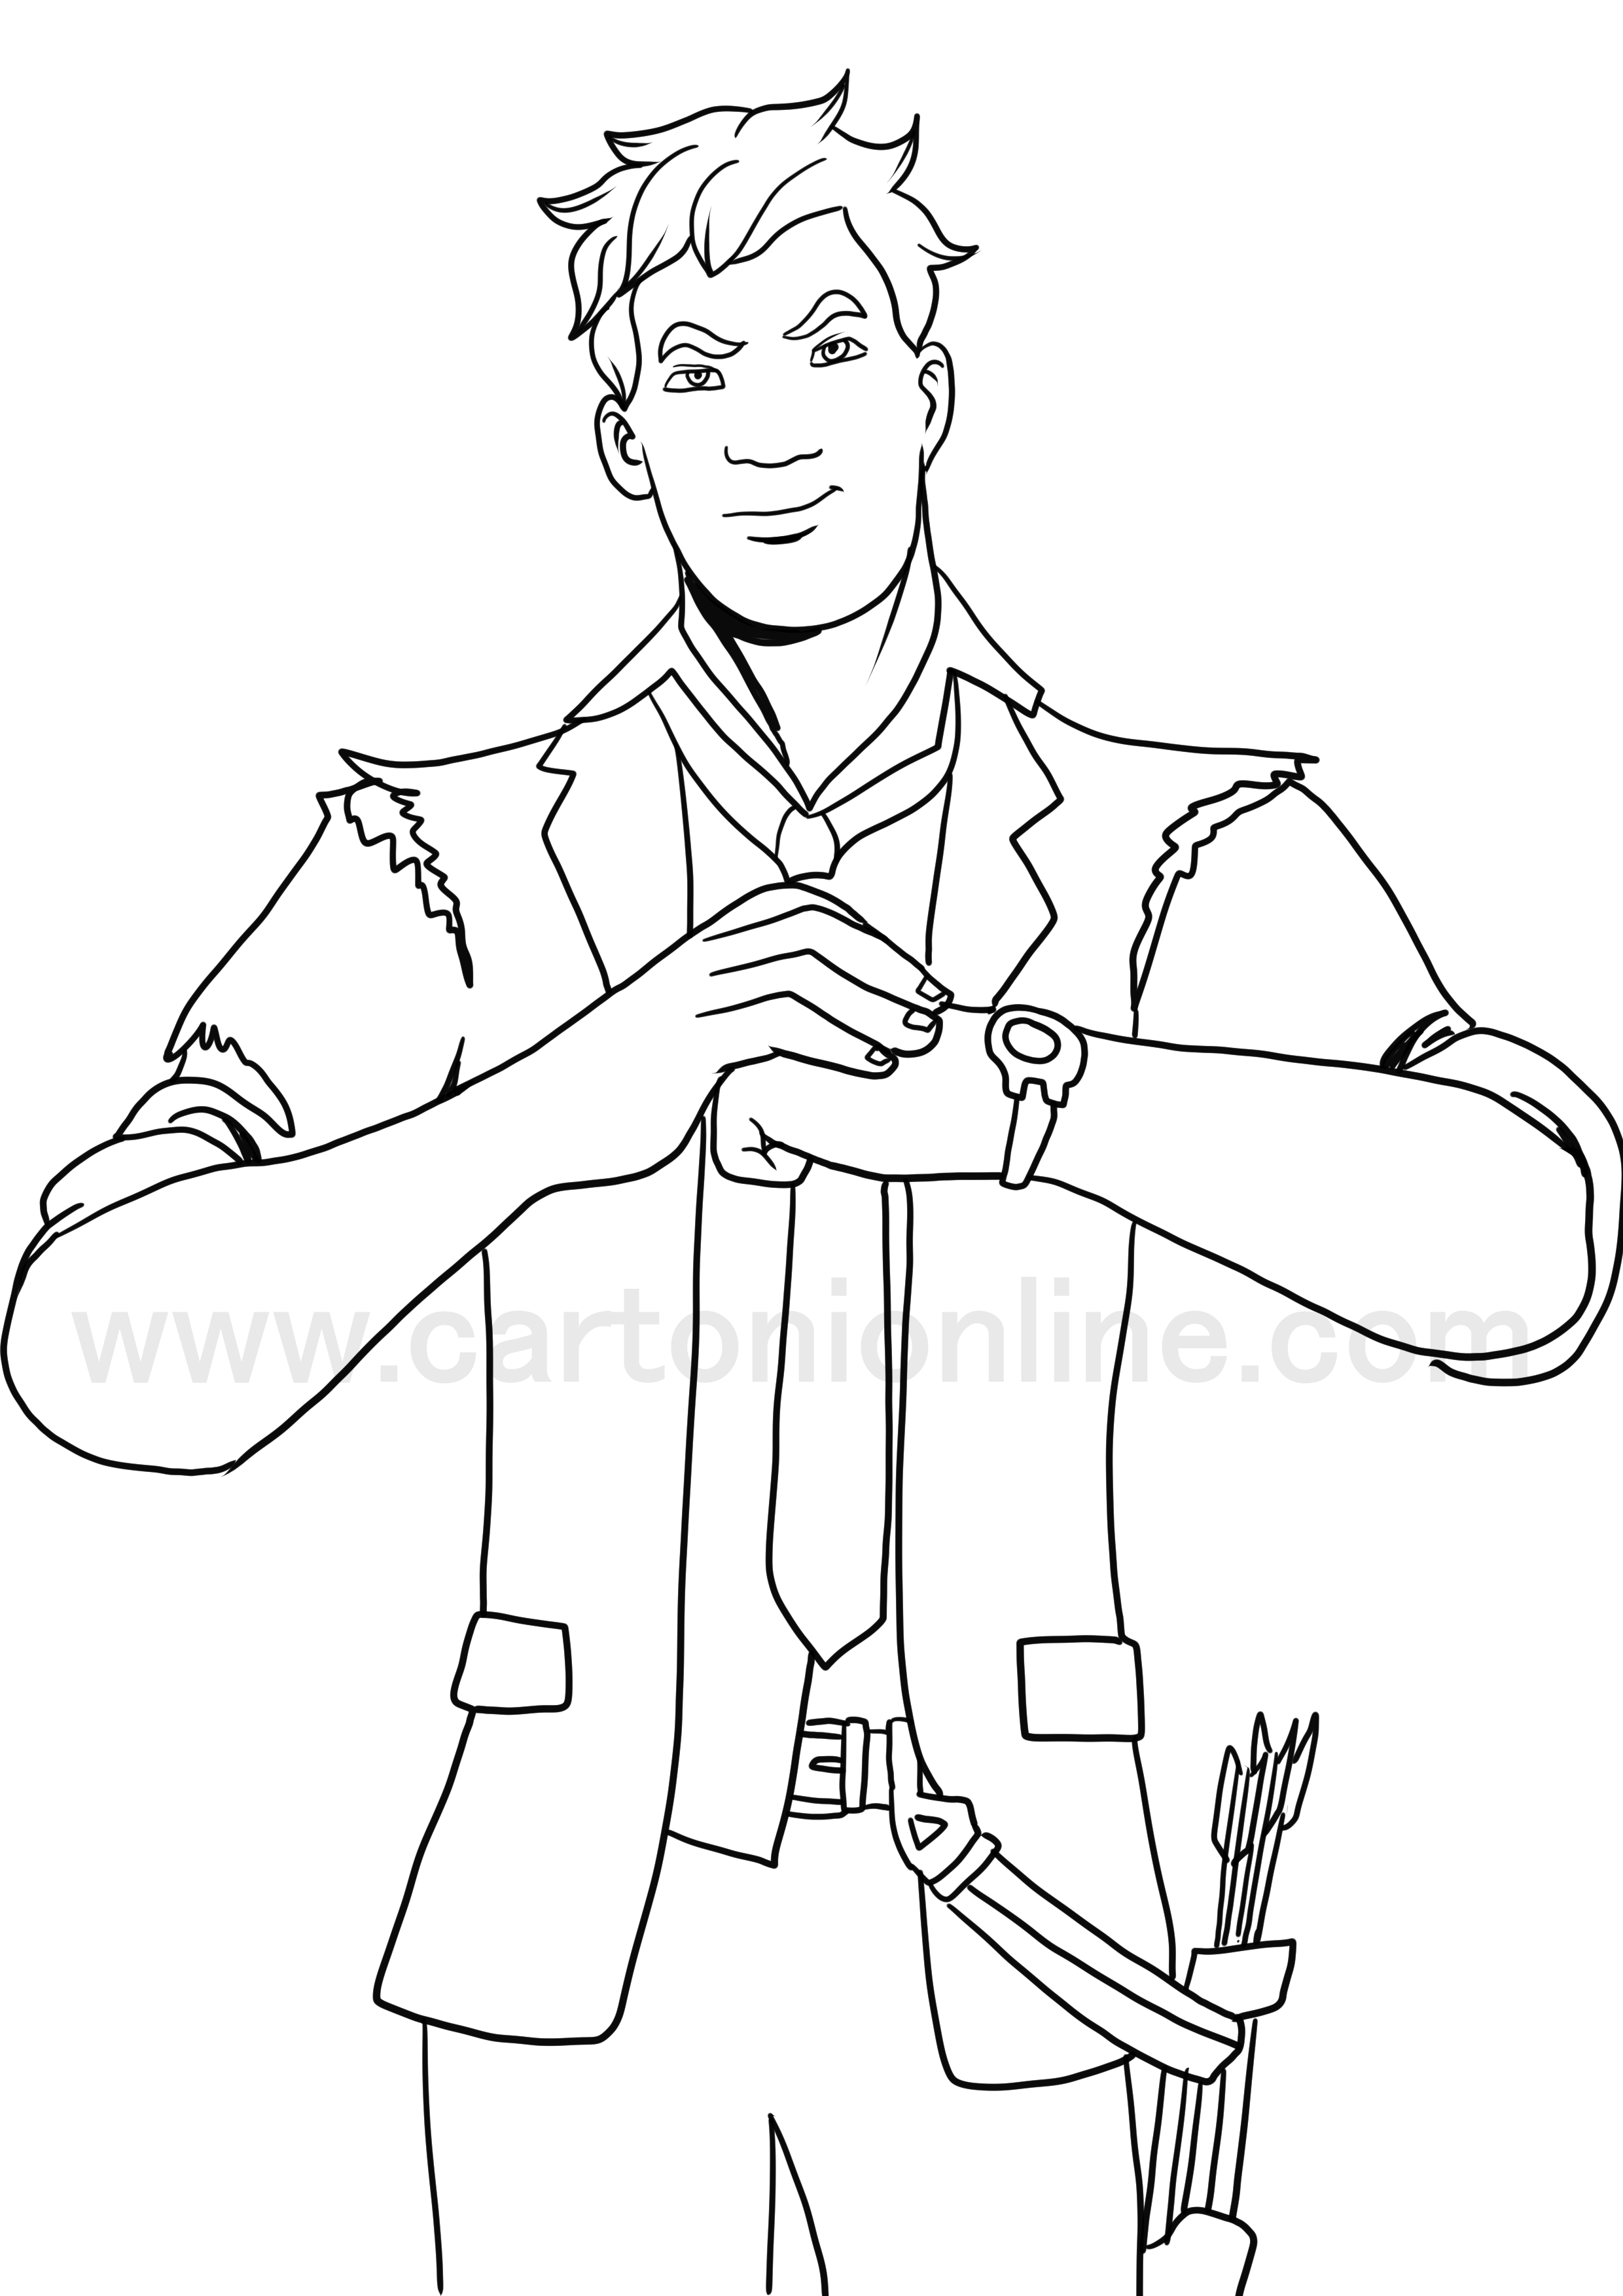 Agent Jonesy from Fortnite coloring page to print and coloring